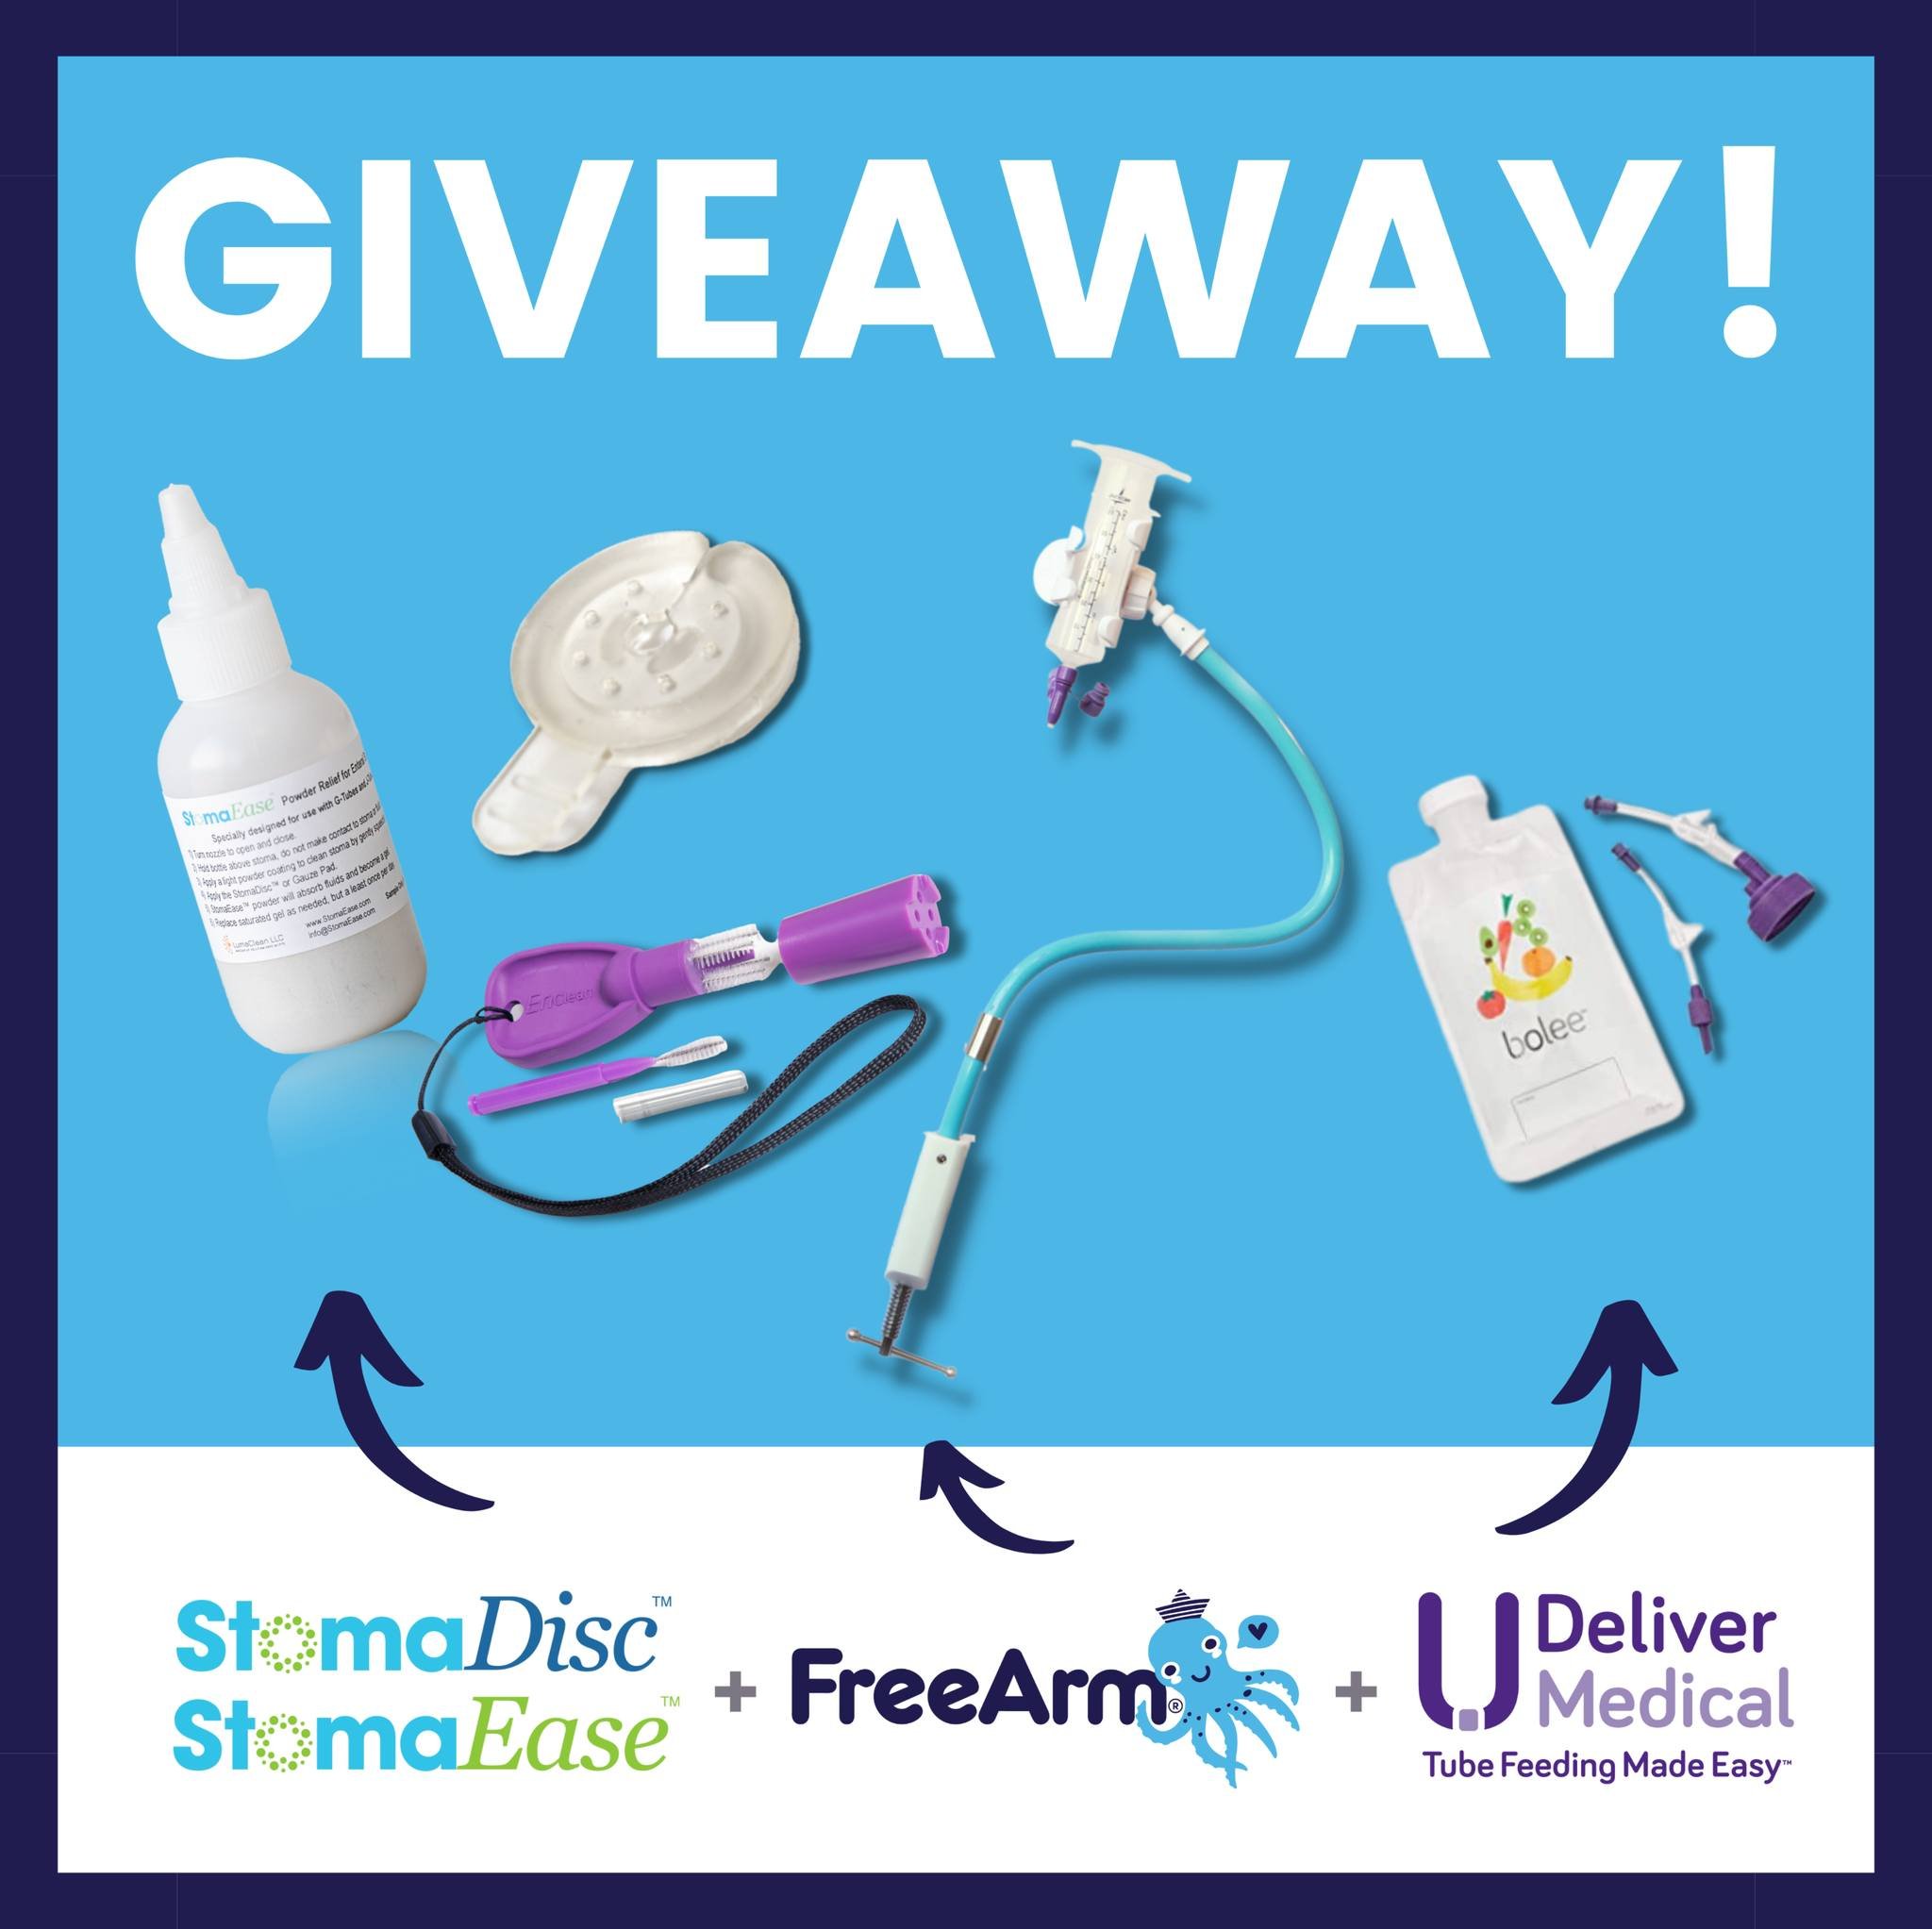 We are excited about this awesome giveaway with @udelivermedical, @lumacleancares, and @freearm.tube.feeding.assistant!

One lucky winner will win a FreeArm in the color of their choice, an EnClean Brush, a bottle of StomaEase &amp; a StomaDisk, 5 Bo